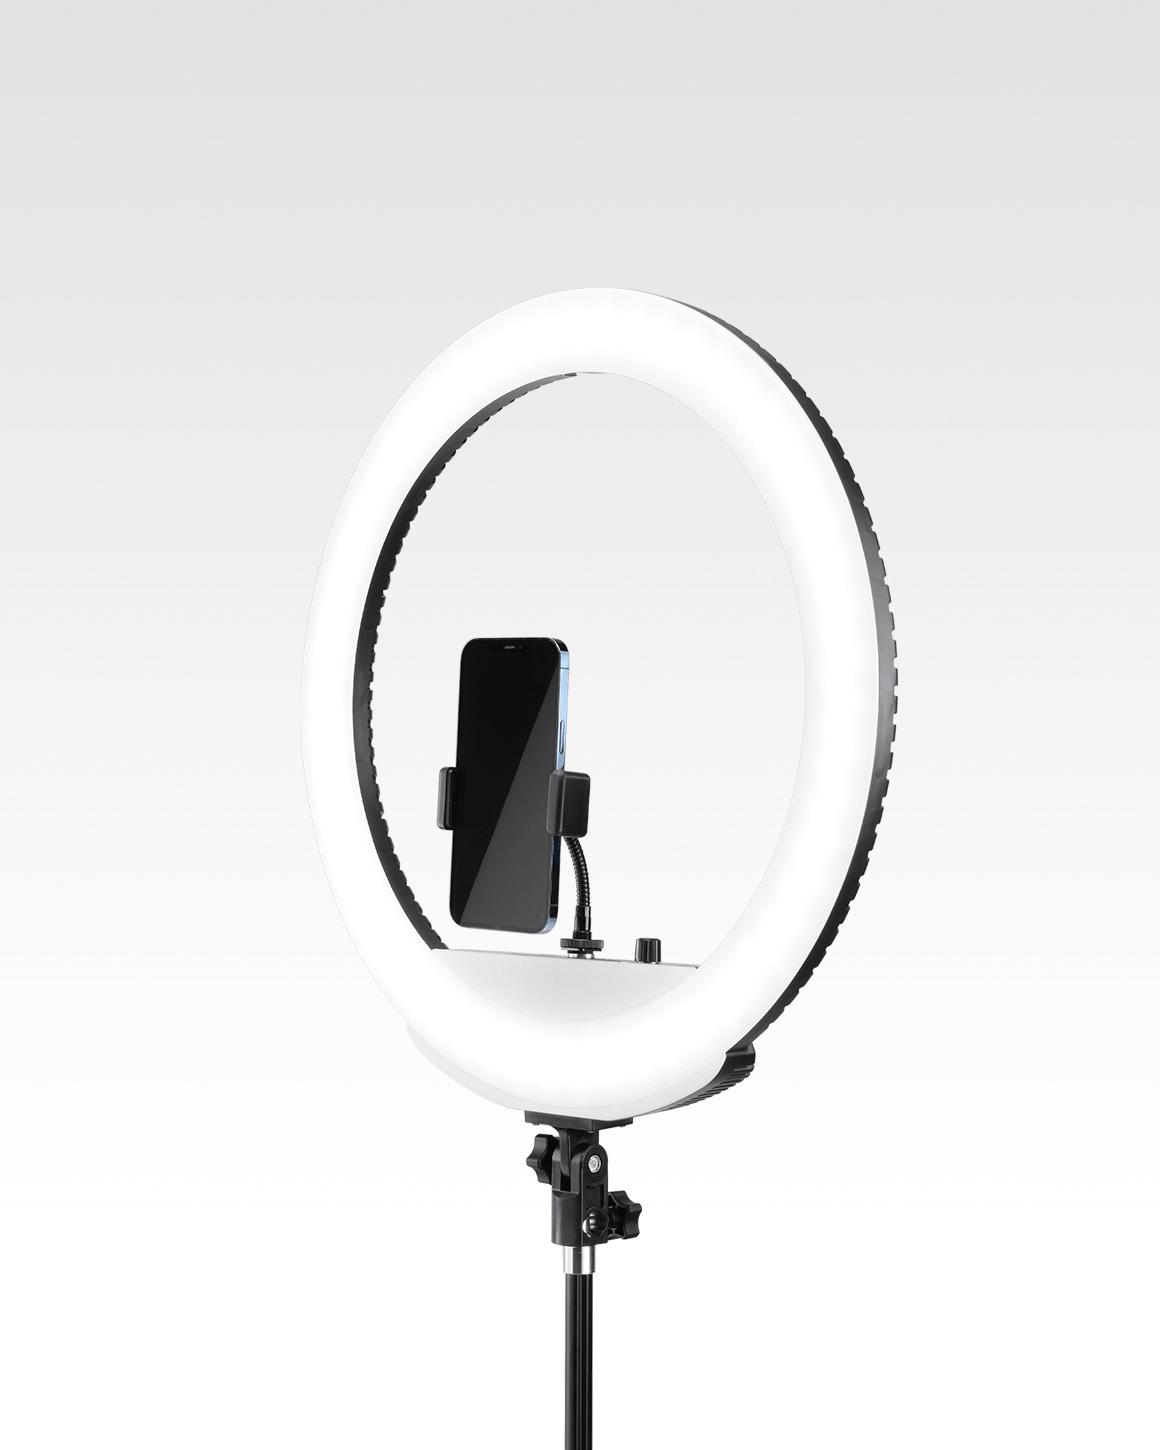 Ring Light: 18 Portable LED Ring Light with Stand